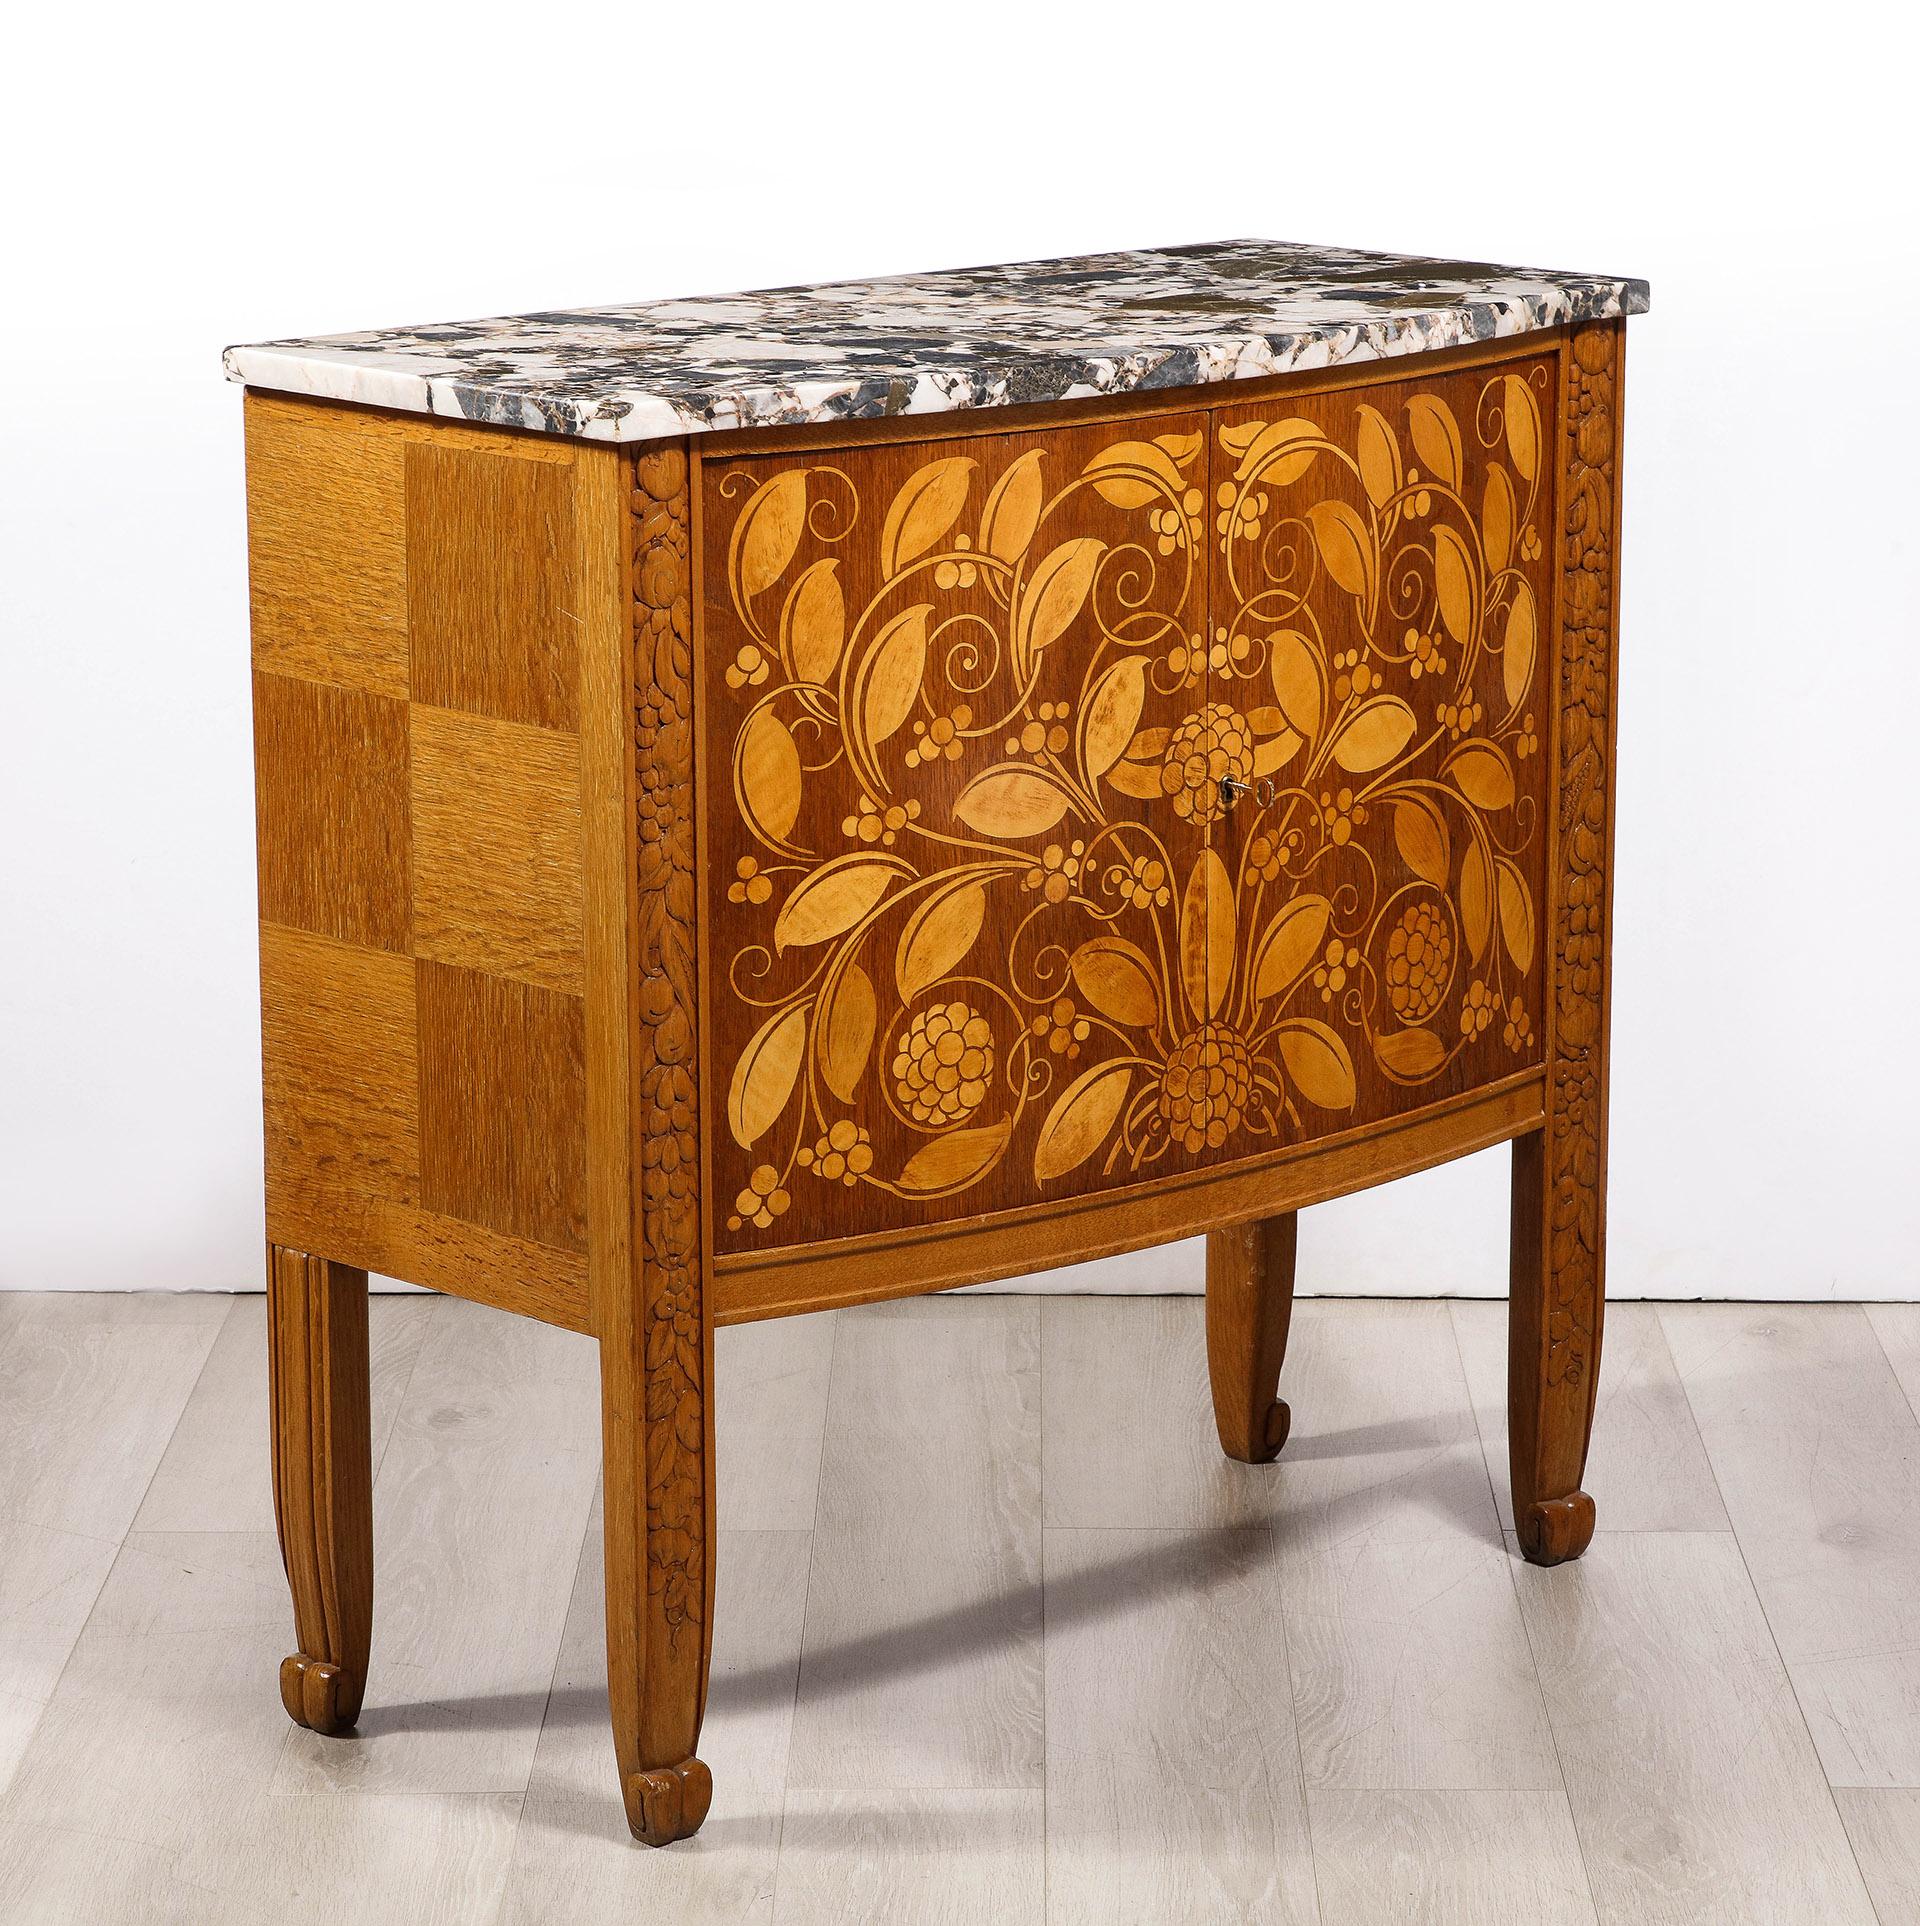 The variegated marble top supported by a richly carved oak case with two elegantly rendered sycamore marquetry in doors.

Reference: 